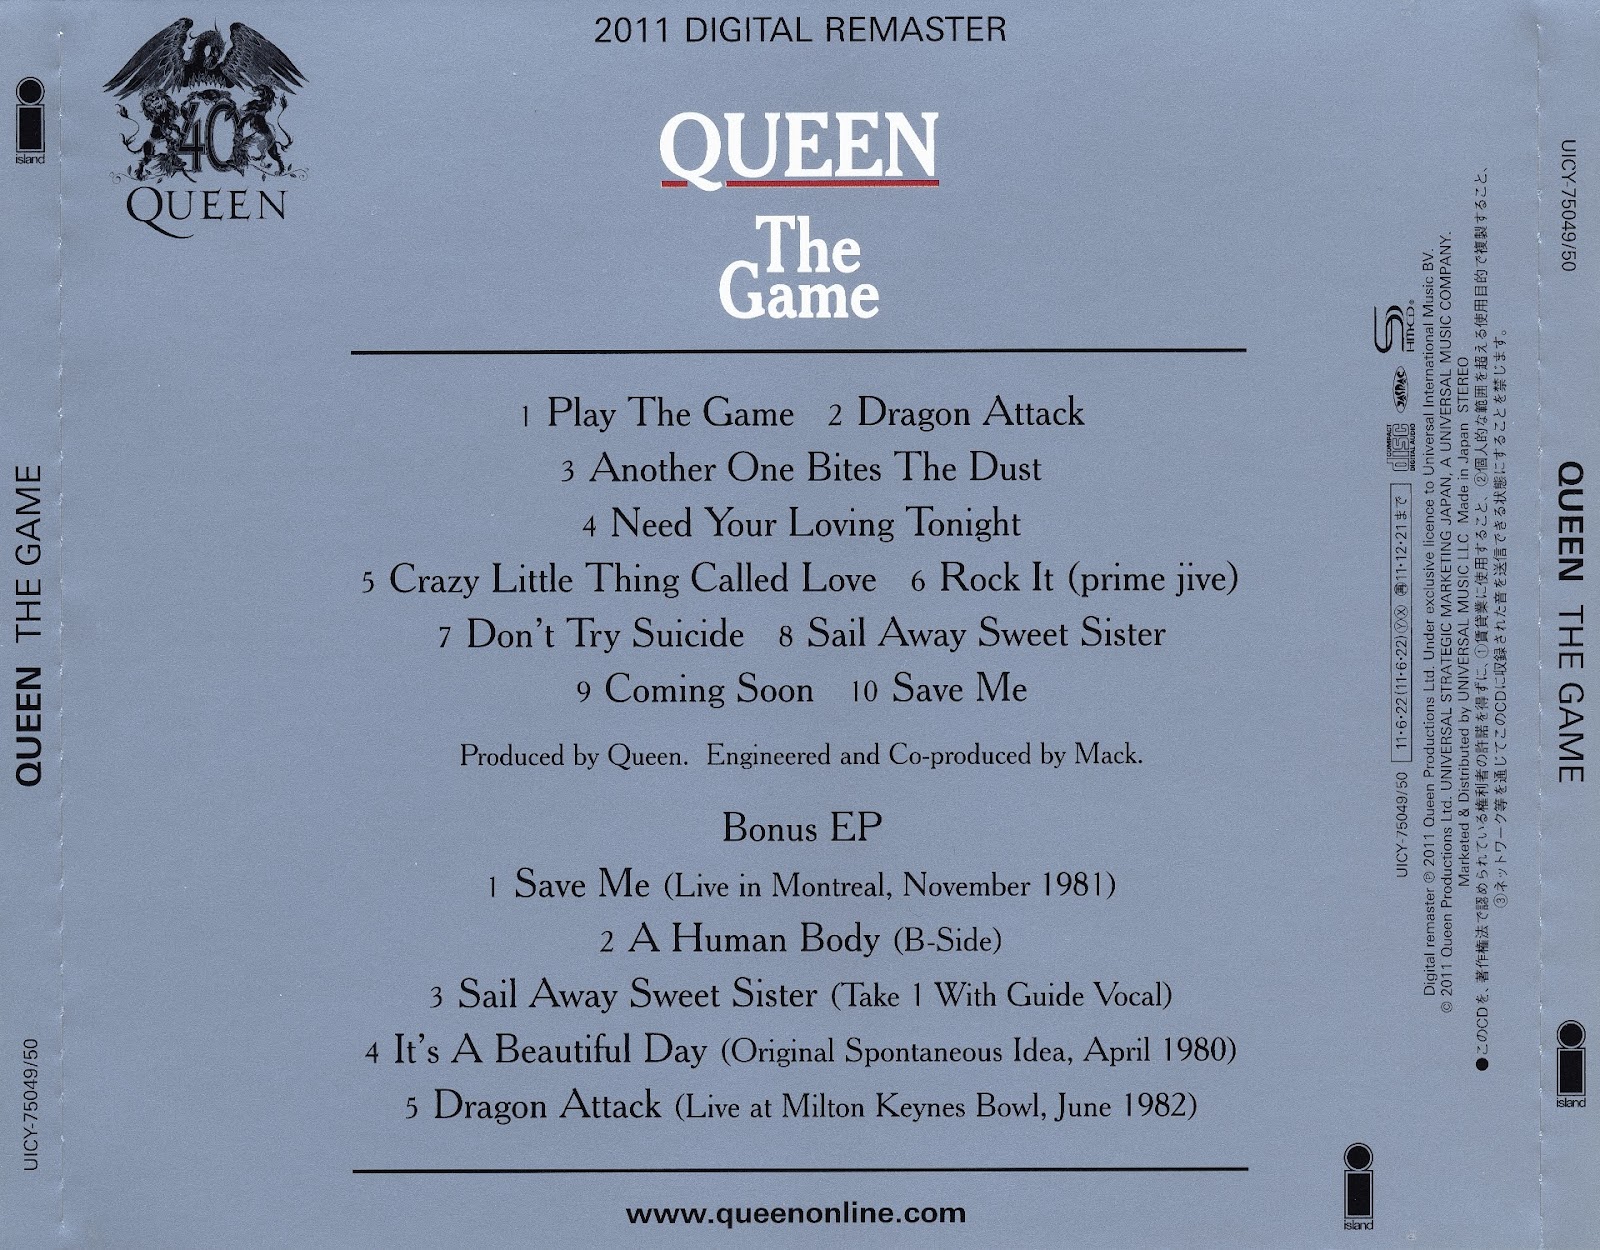 Bite the dust текст. Queen the game обложка. Queen "the works (2cd)". Queen the game 1980 обложка альбома. Queen Queen 1973.